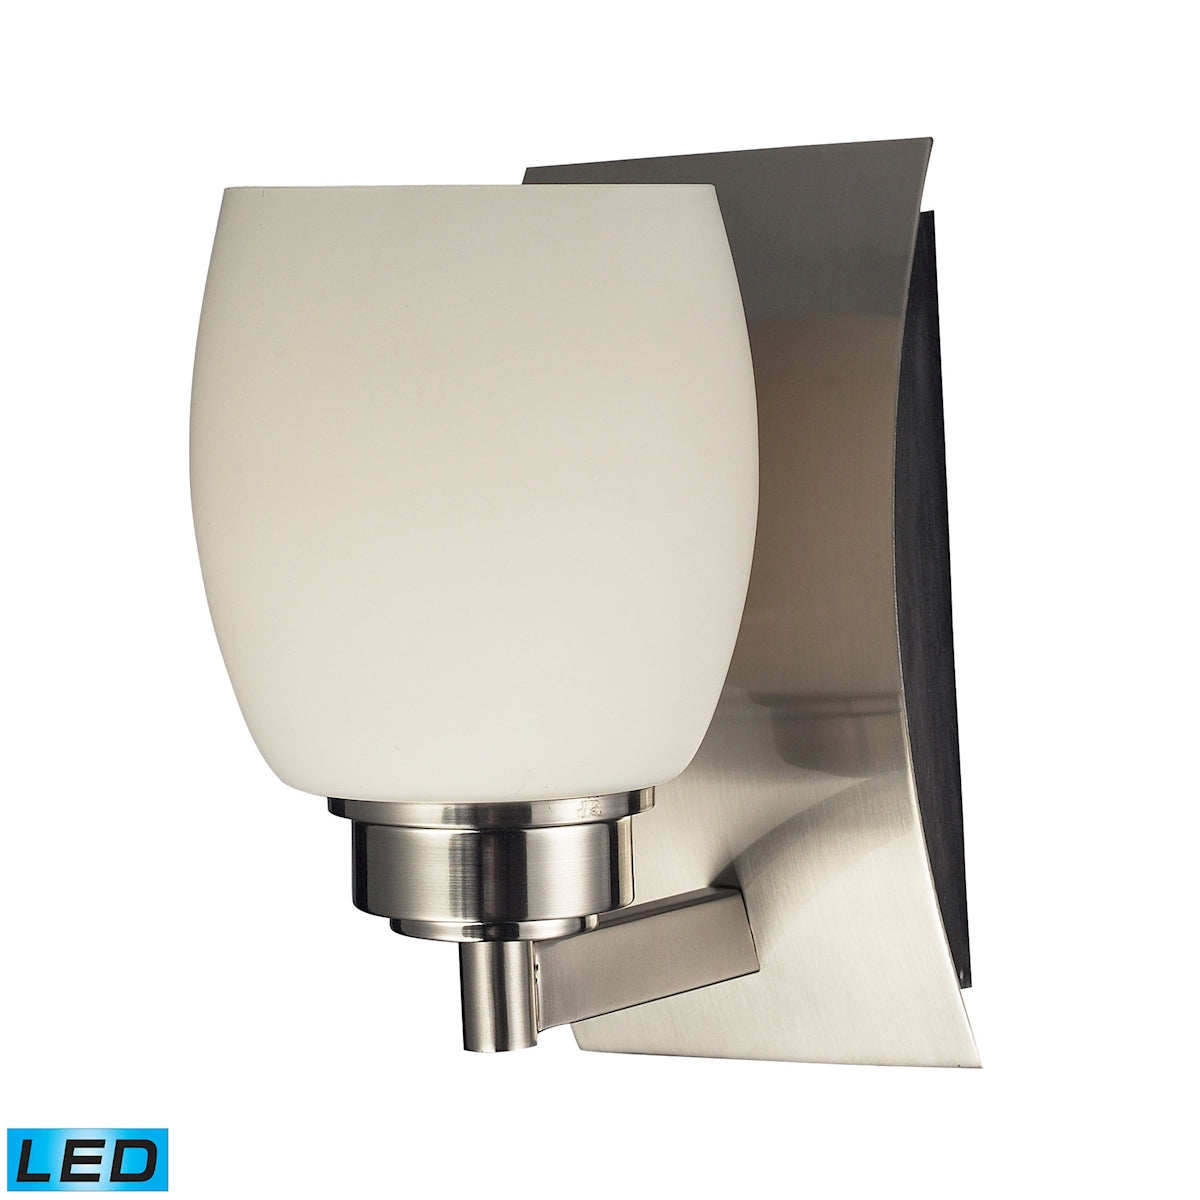 ELK Lighting 17100/1-LED Northport 1-Light Vanity Lamp in Satin Nickel with Opal Glass - Includes LED Bulb